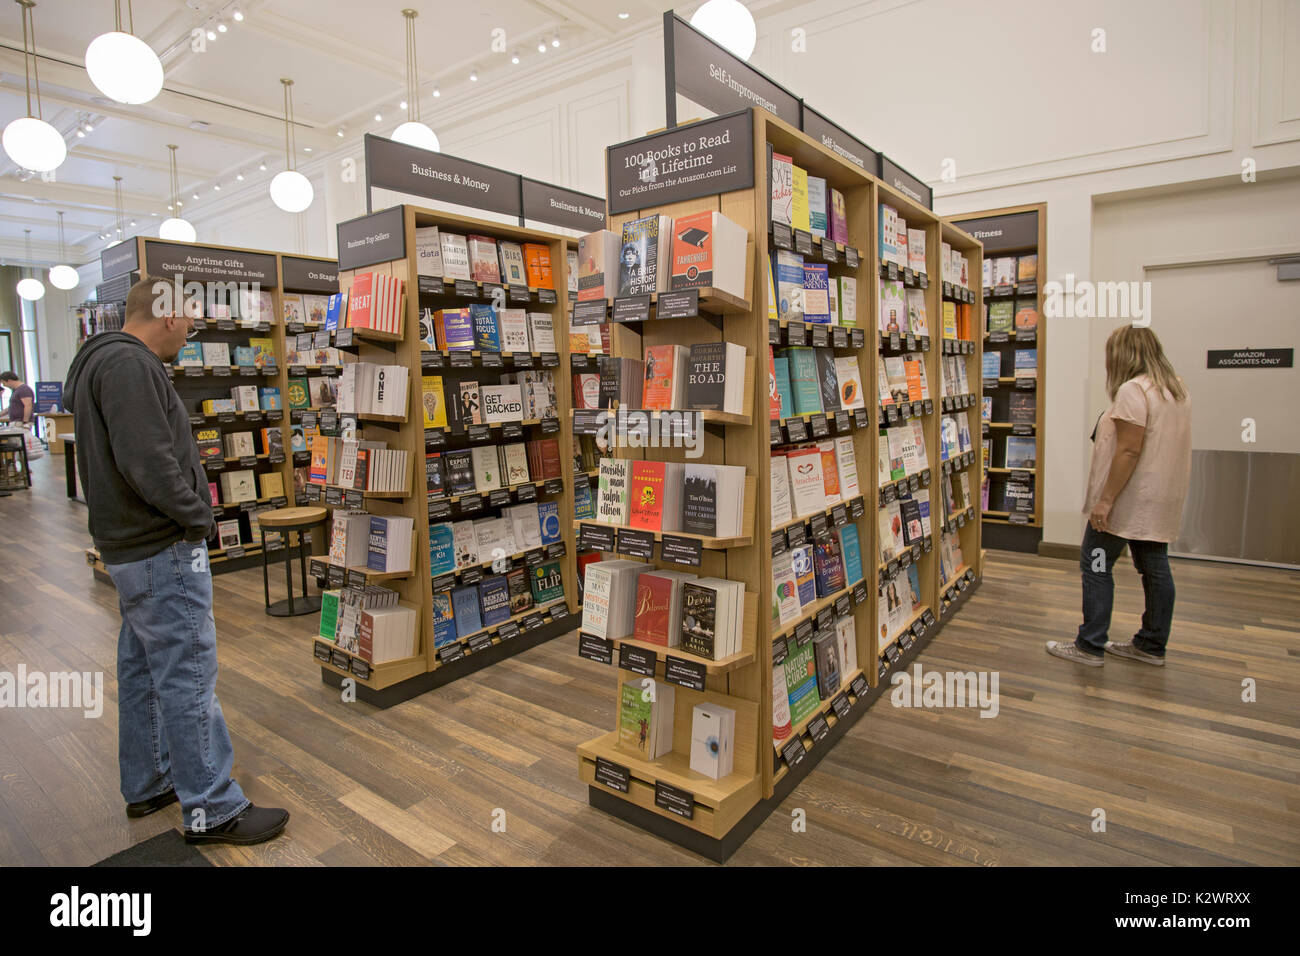 Customers browsing the shelves at the recently opened Amazon Book Store on W. 34th Street in Manhattan, a rare Amazon brick & mortar store. Stock Photo